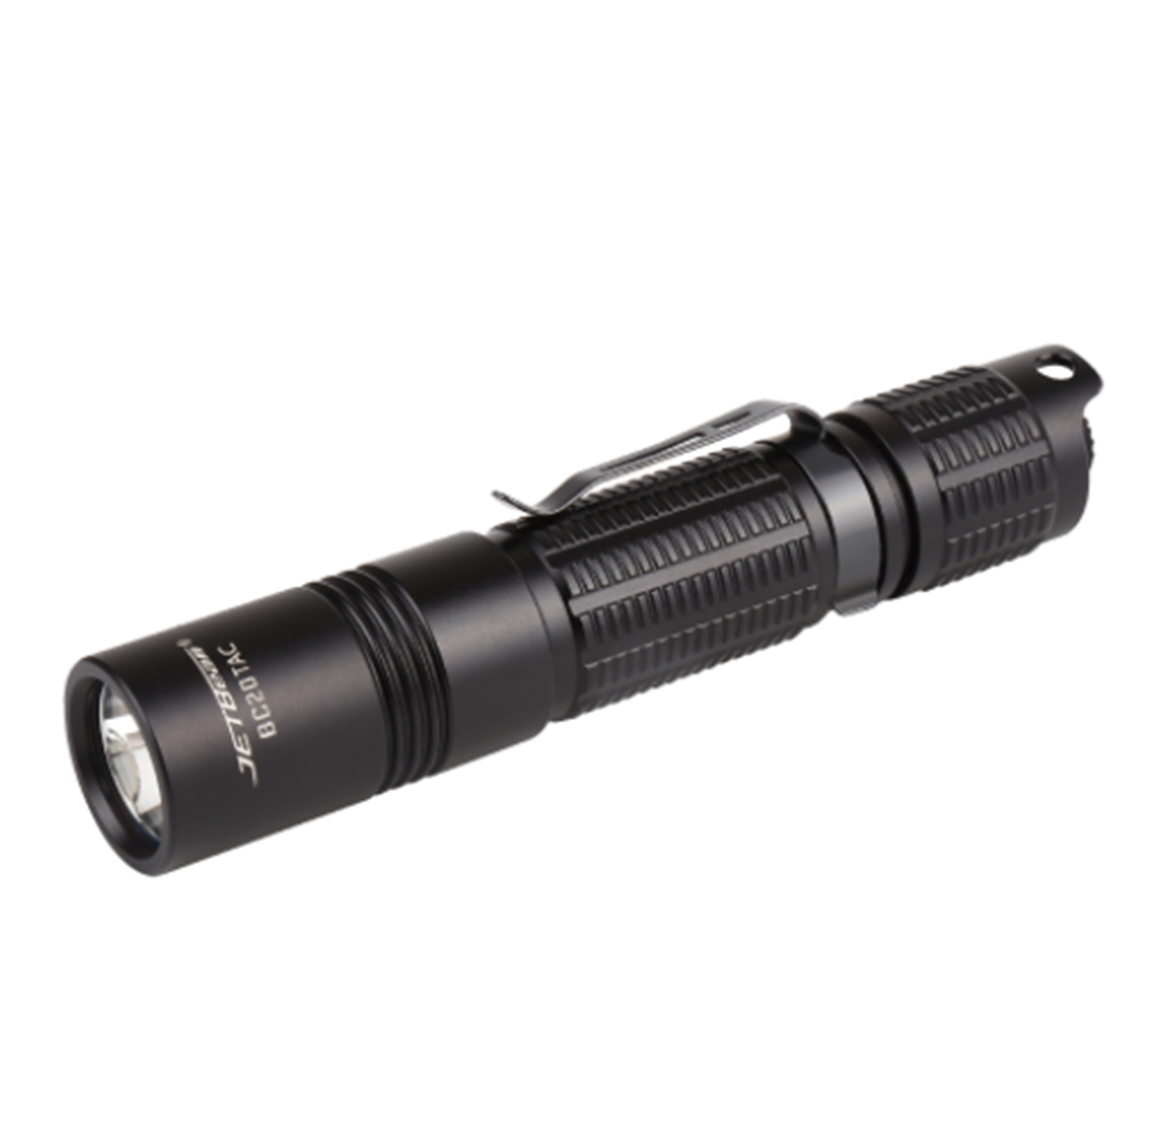 JETBeam BC20TAC 1100LM 263m Ultrabright Anduril UI Strong Flashlight Long Throw 18650 Powerful LED Torch Camping Hunting